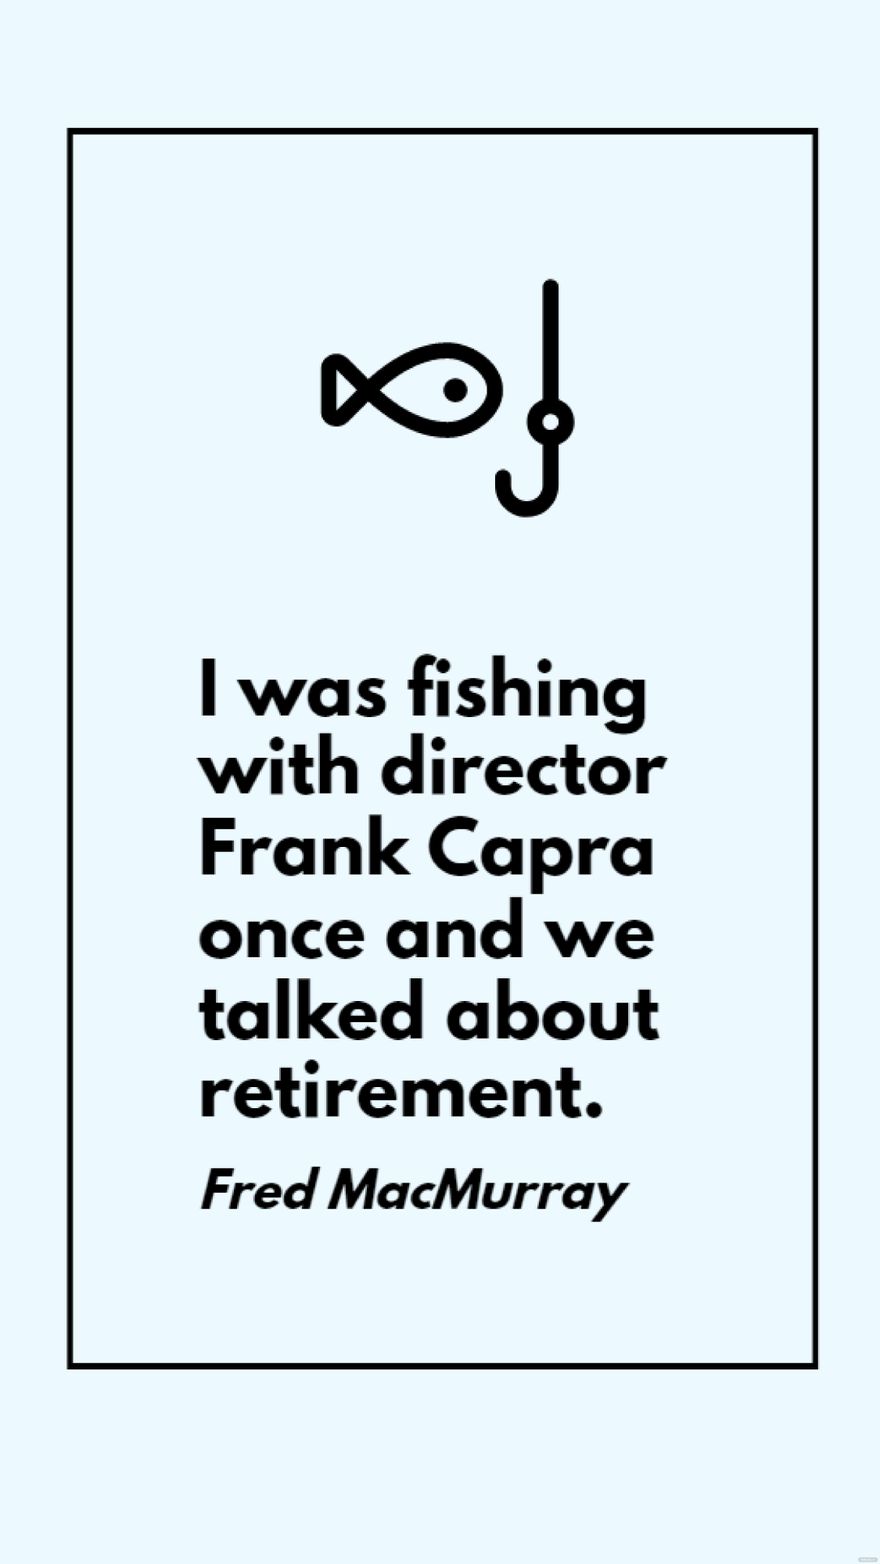 Fred MacMurray - I was fishing with director Frank Capra once and we talked about retirement. in JPG